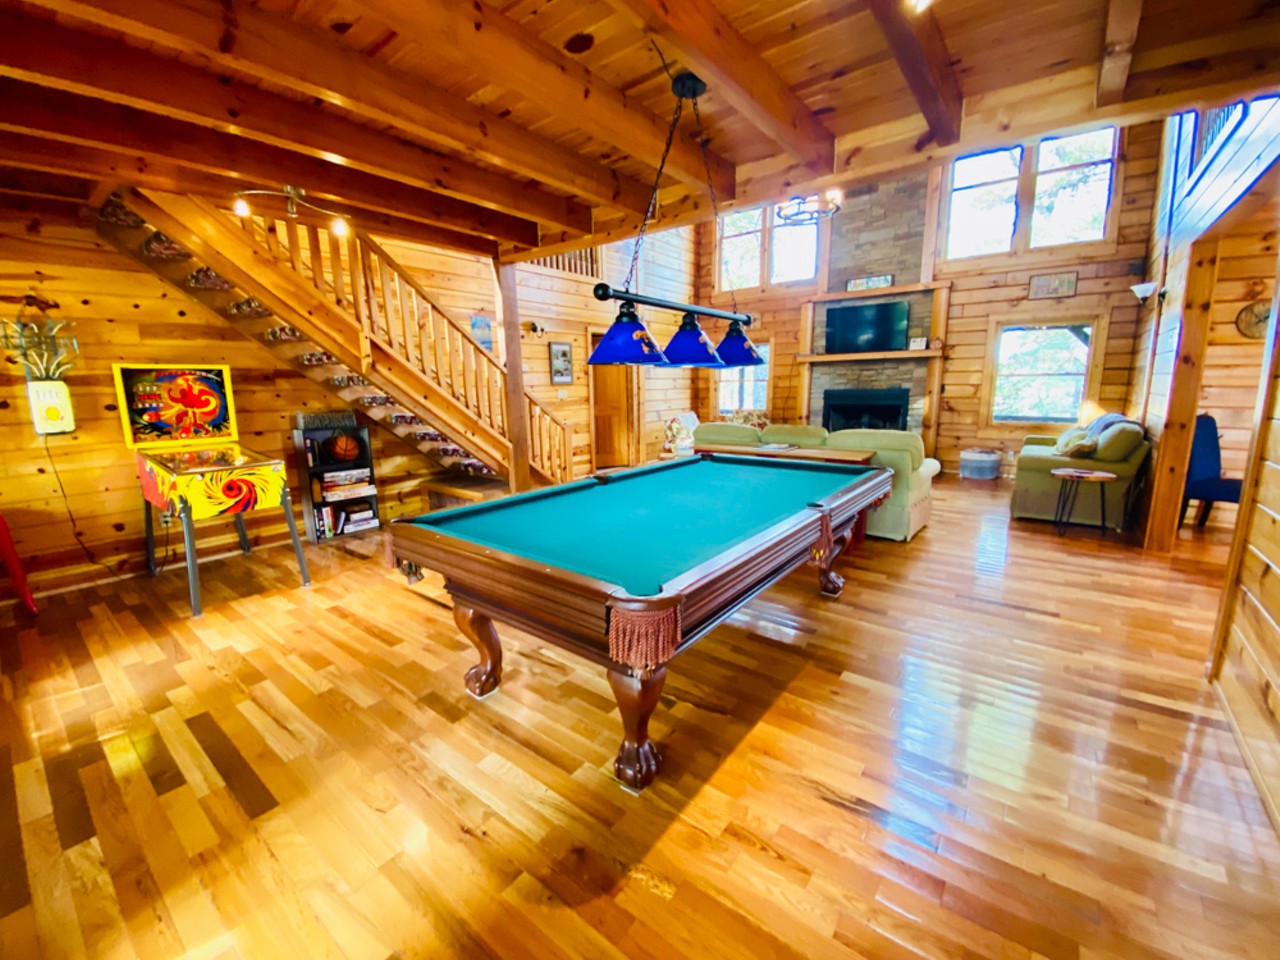 Terrapin Station
Entire Cabin | Starting at $379/night | Hosts 10 Guests 
&#147;Welcome to Terrapin Station, one of the most unique and impressive getaways in the Red River Gorge! There's no better way to start your day than sipping your coffee, watching the morning fog rise from the valley floor below! From the gourmet kitchen, expansive great room, well equipped game room, and inviting outdoor spaces Terrapin Station is a destination of its own! You're also sure to enjoy its convenient location within 5 min of attractions/food, easy drive-in access, and high speed WiFi.&#148;